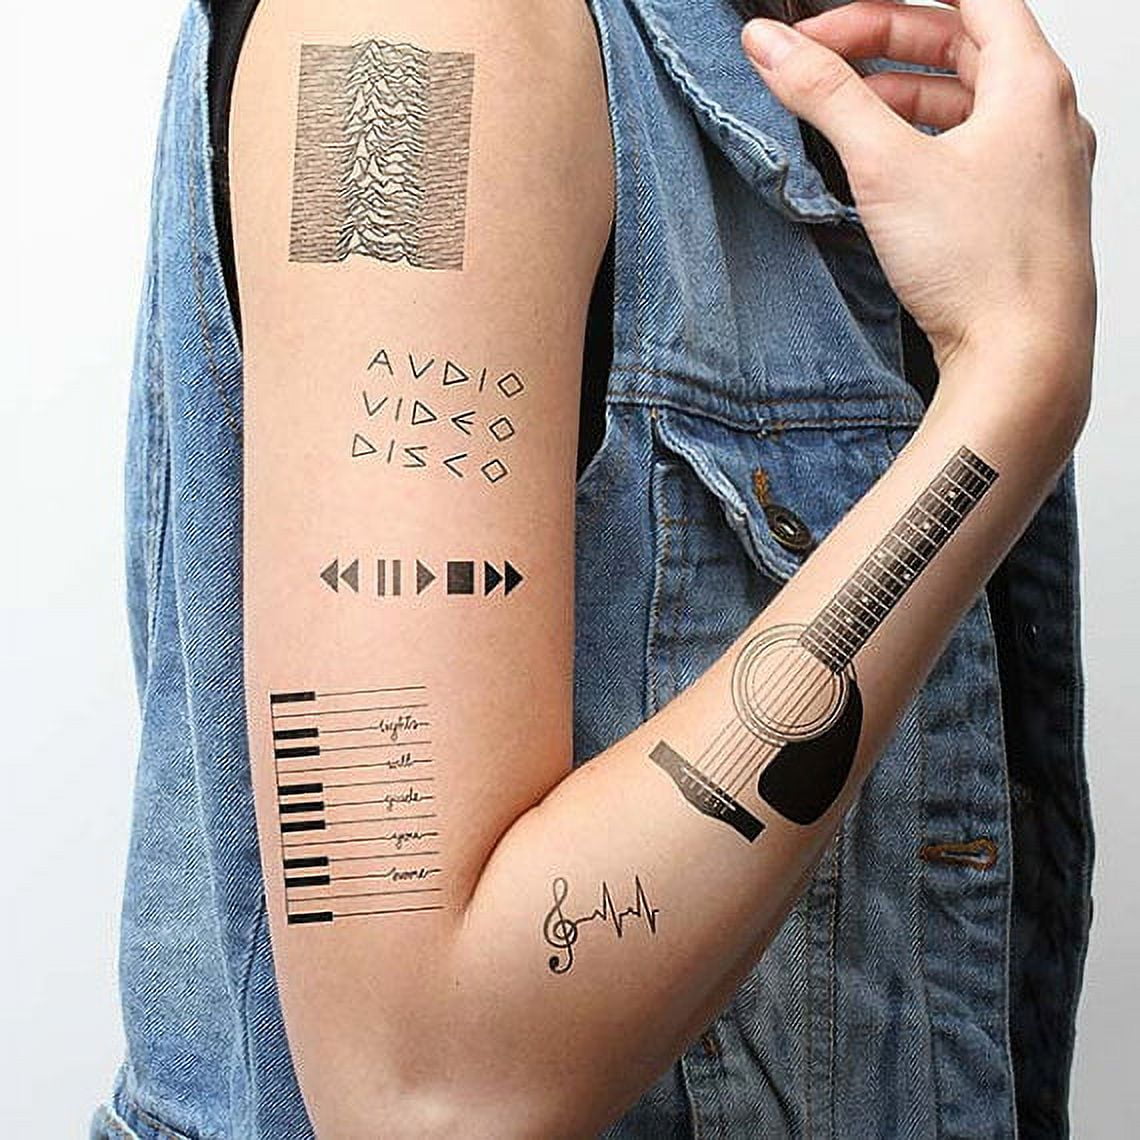 New 'Soundwave' Tattoos Can Talk and Play Music